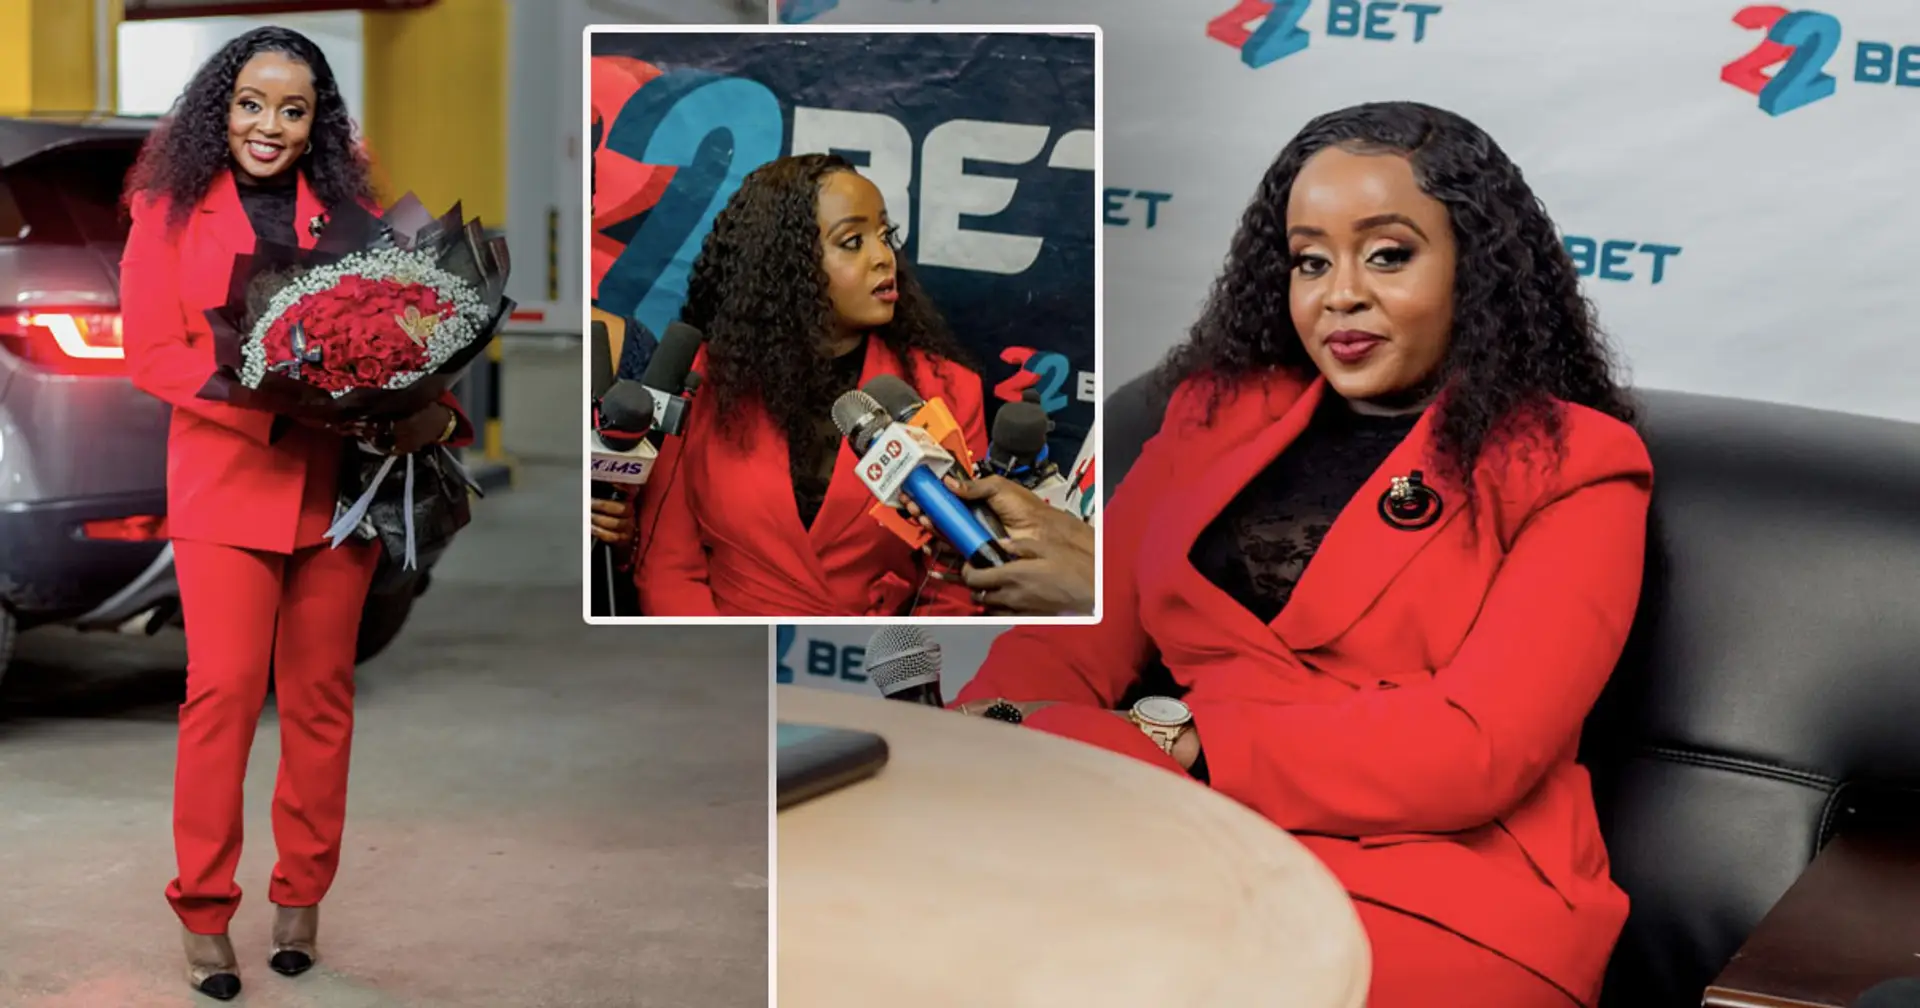 'I believe in power of sports to connect people!': Afro-pop star and MTV nominee becomes 22Bet ambassador 